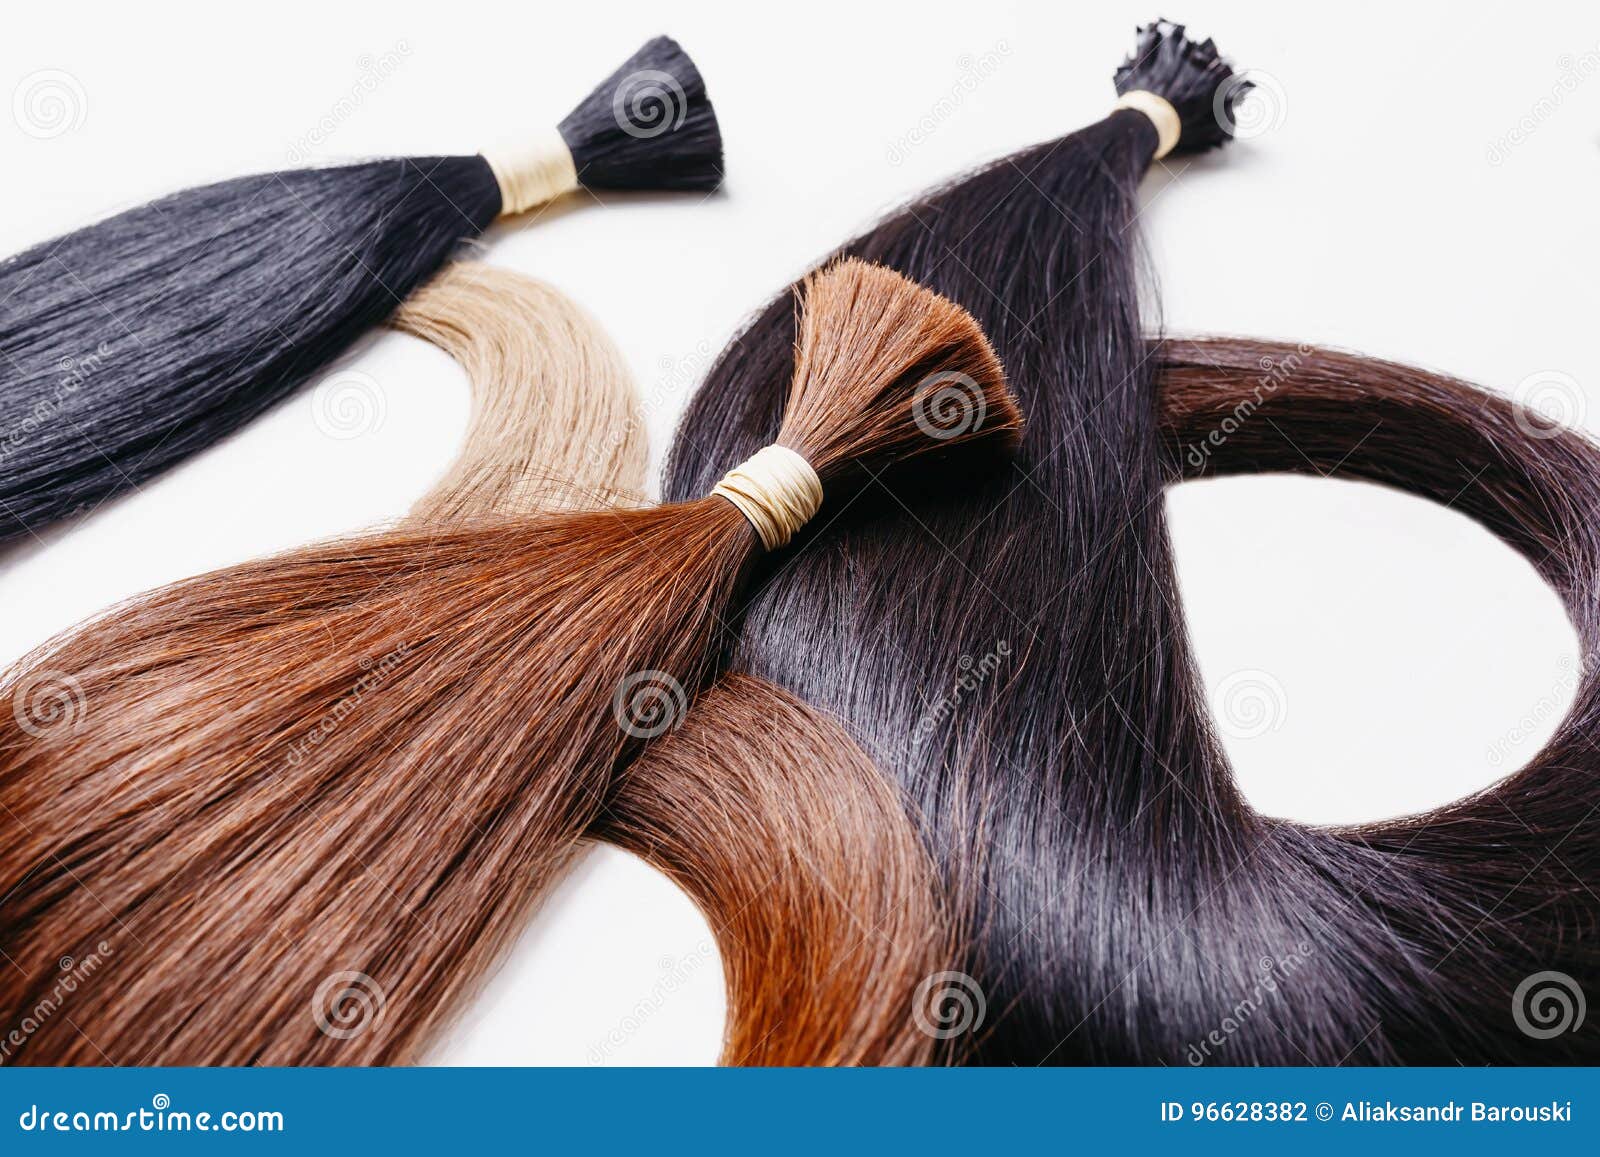 hair extensions of three colors on a white background. copyspace selective focus